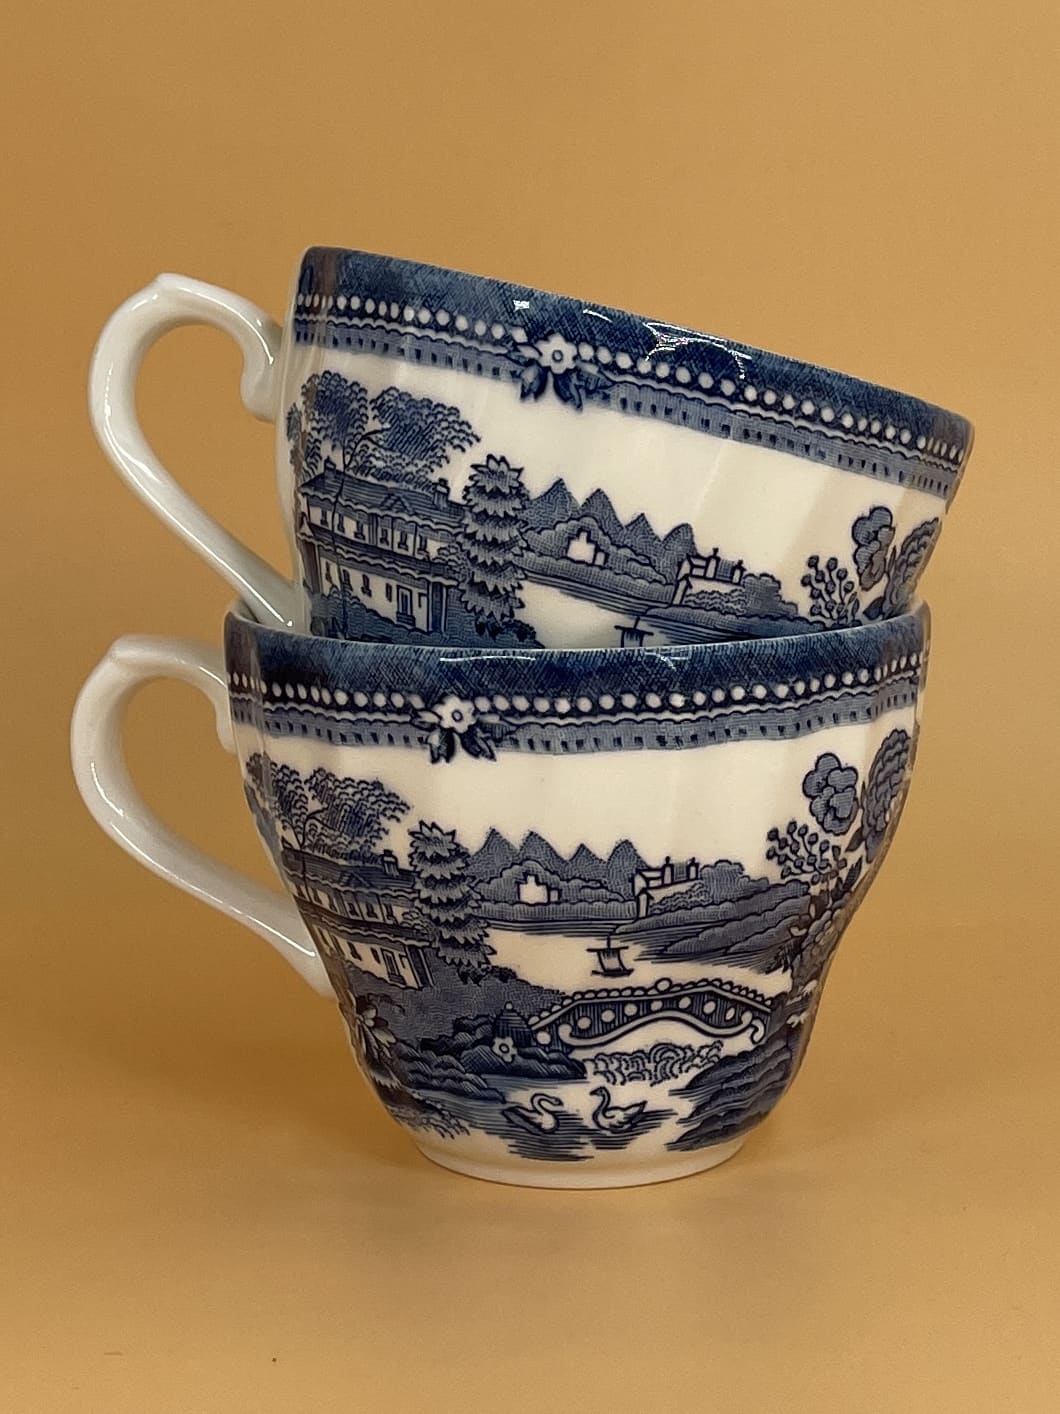 Vintage Painted Blue and White Tea Cups (Set of 2)